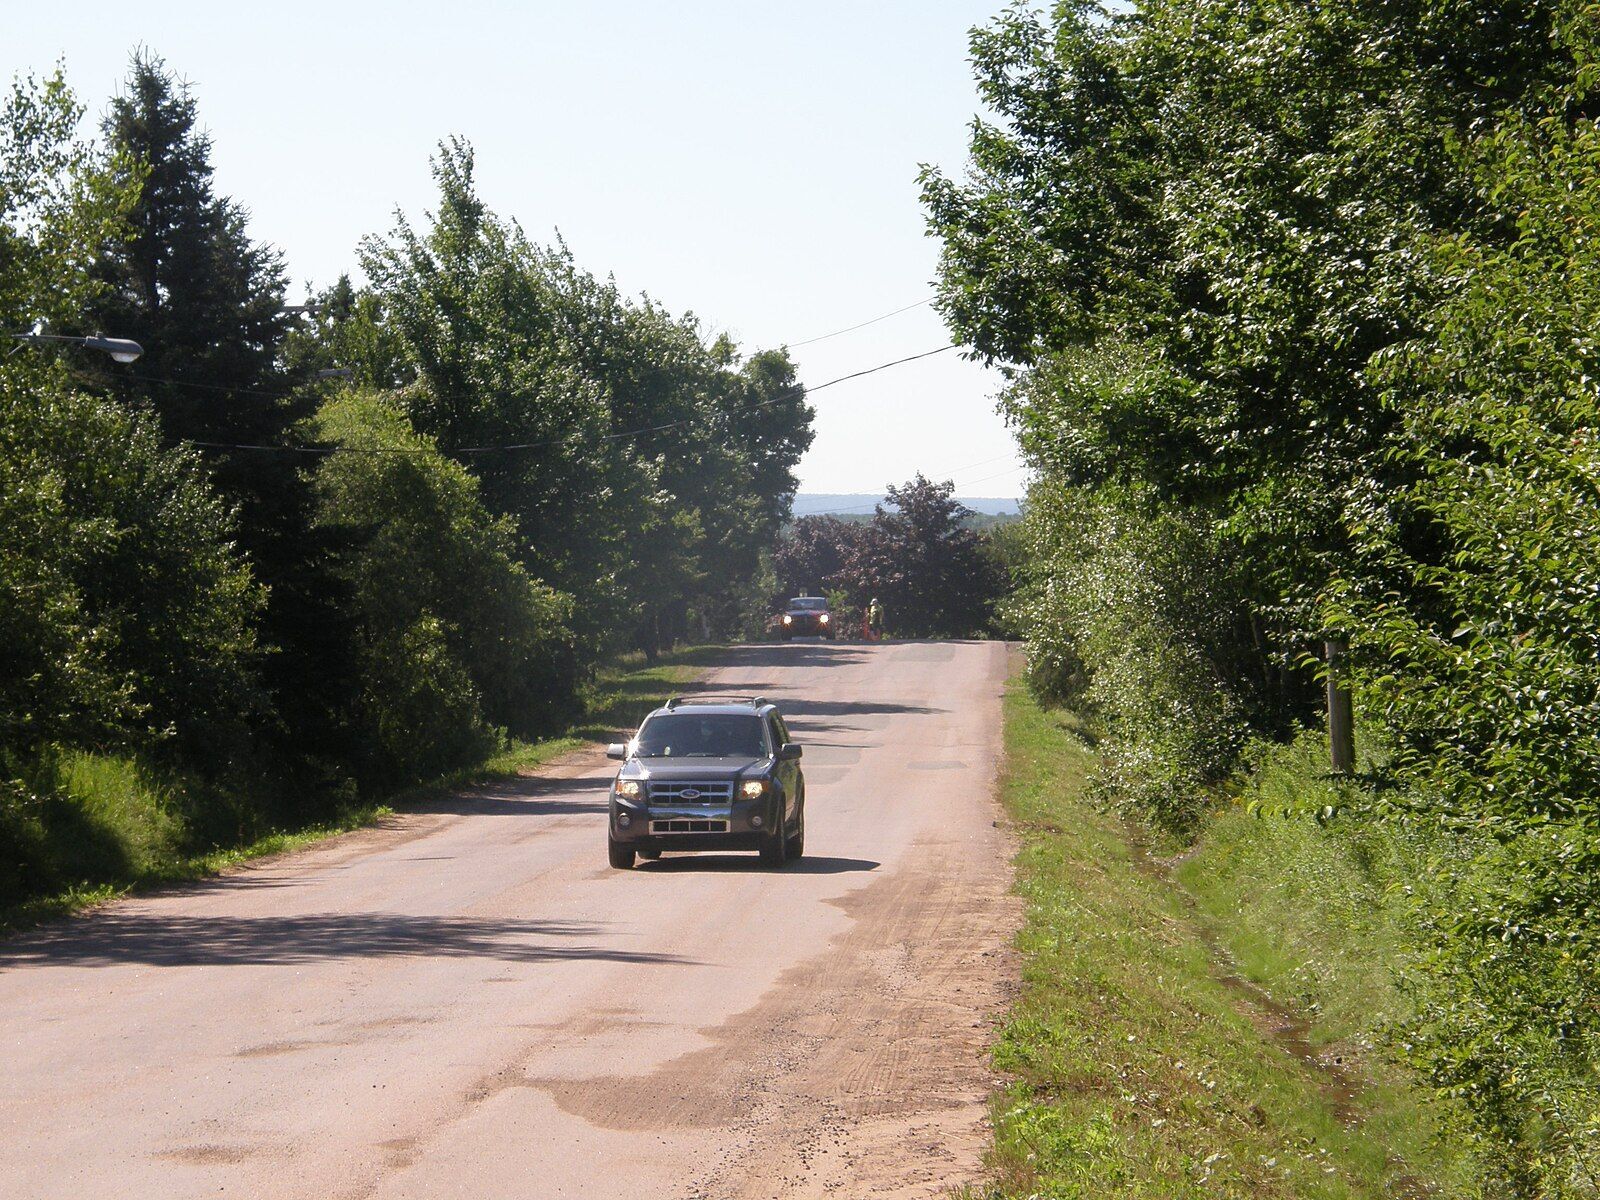 <p>Off the Trans-Canada Highway in New Brunswick, Moncton’s famous <a href="https://www.atlasobscura.com/places/moncton-magnetic-hill">Magnetic Hill</a> has perplexed tourists since the 1930s. On this gravity hill, if you take your foot off the brakes and put your car into neutral, you’ll watch in amazement as the car rolls backward uphill! However, you’ll be the judge if this tourist attraction—or trap—is worth the park admission fee to find out whether there is an actual magnetic field in play here, or whether it’s simply <a href="https://canadiangeographic.ca/articles/rolling-uphill-in-new-brunswick/">an optical illusion</a>. If you’ve come all this way to see the attraction, you might as well stick around to visit the zoo, Magnetic Hill Wharf Village, and the Magic Mountain Water Park. </p>